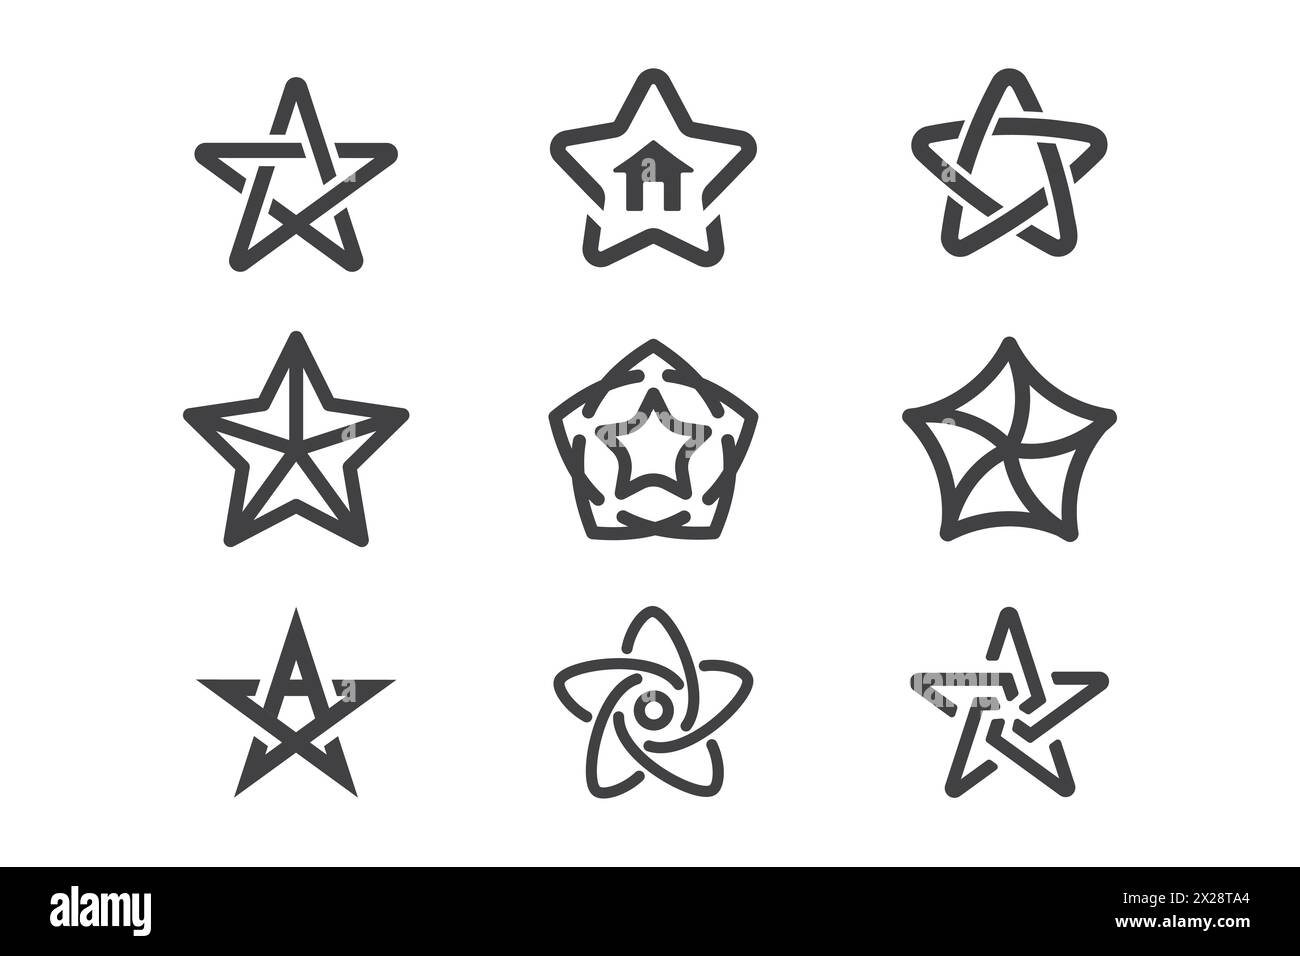 Collection of star outline icons with various shapes Stock Vector